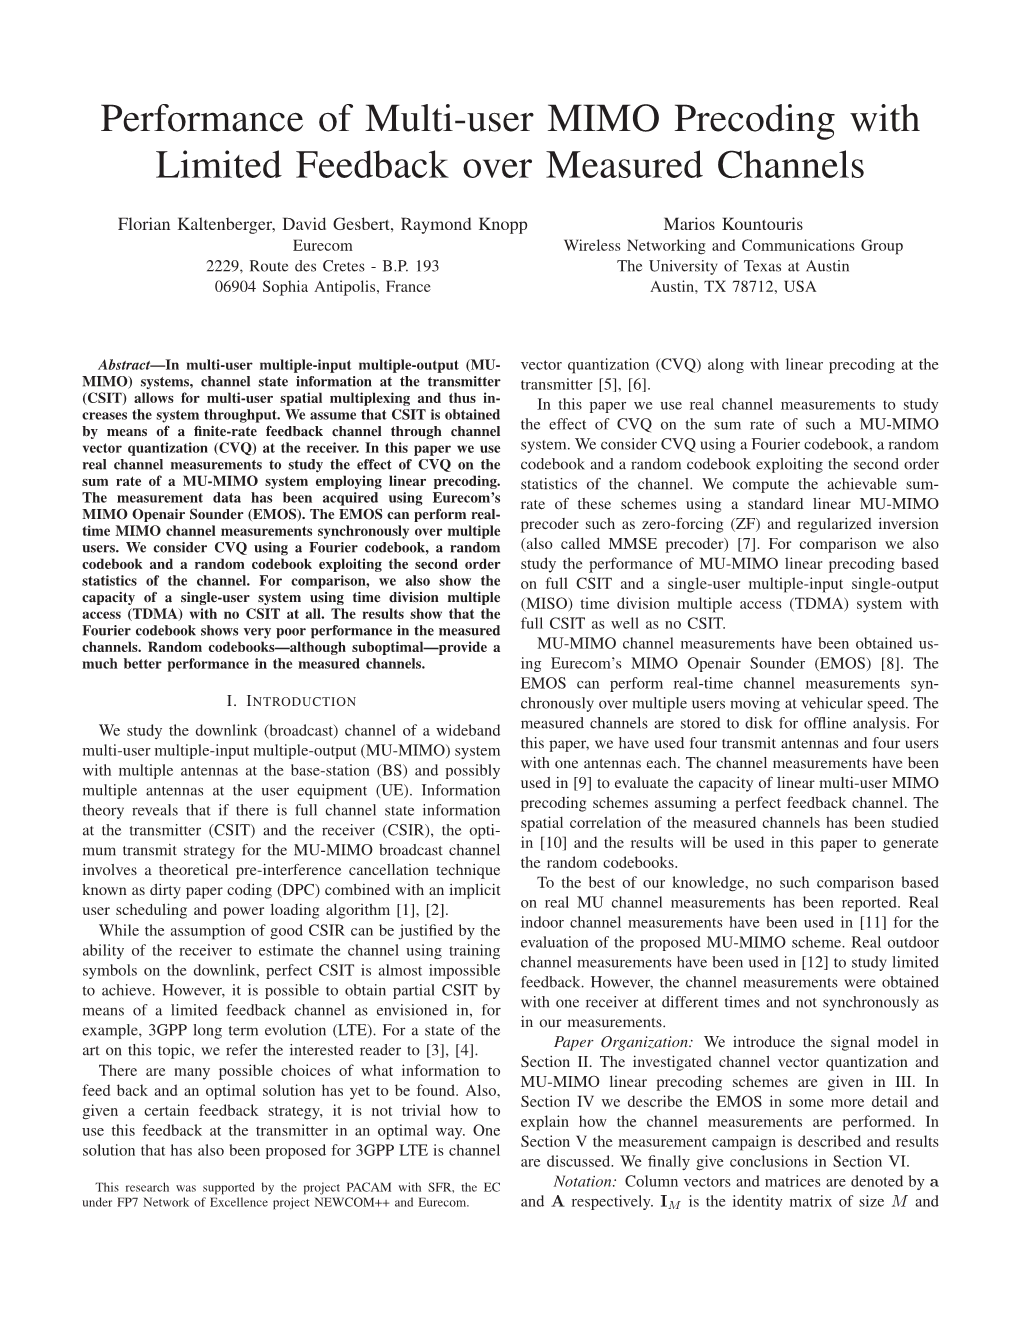 Performance of Multi-User MIMO Precoding with Limited Feedback Over Measured Channels